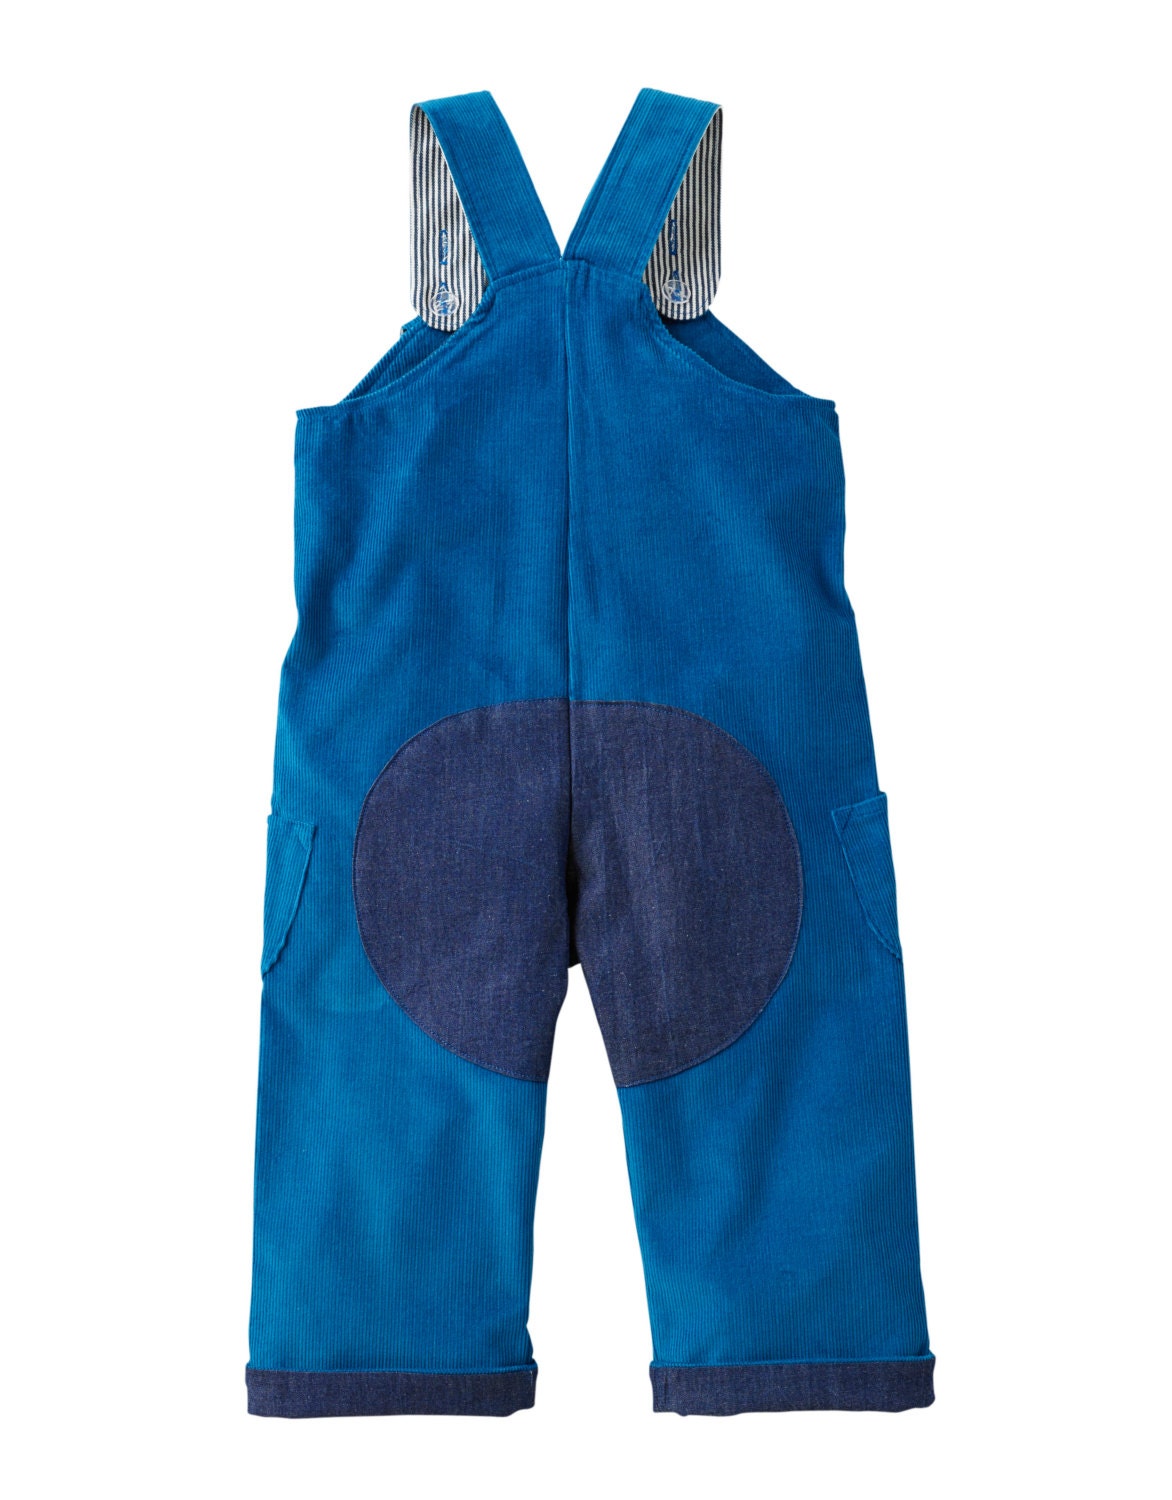 Puppy Dog Dungaree Overalls in Blue Cord - Etsy